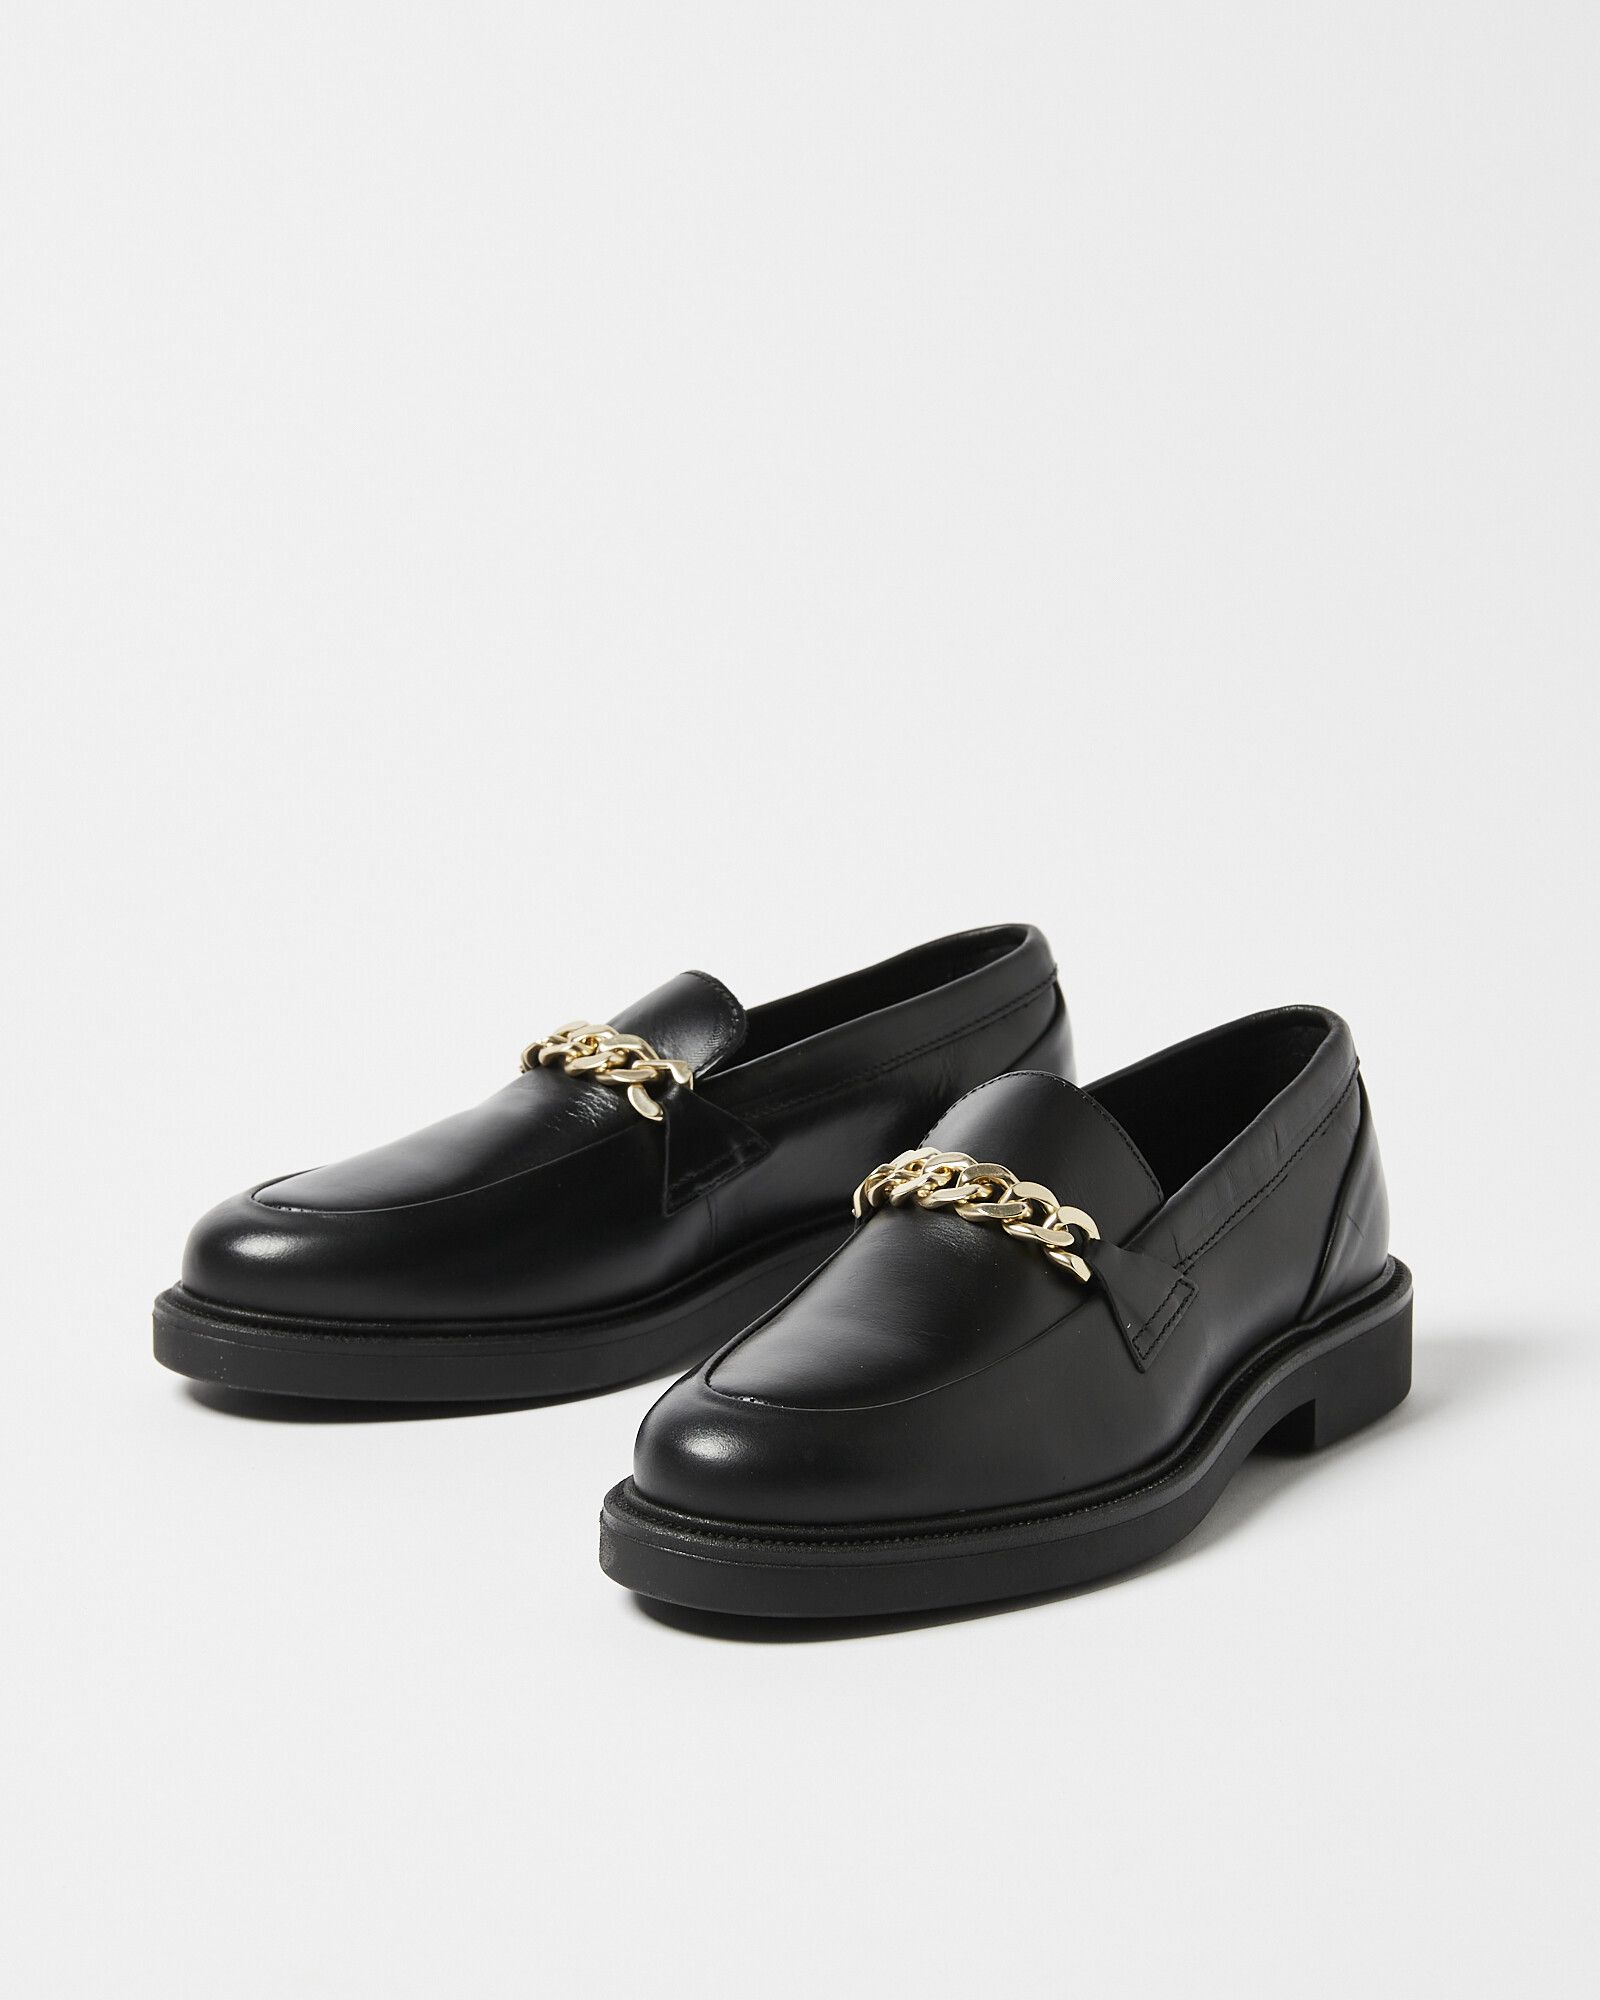 Shoe The Bear Black Leather Chain Loafers | Oliver Bonas